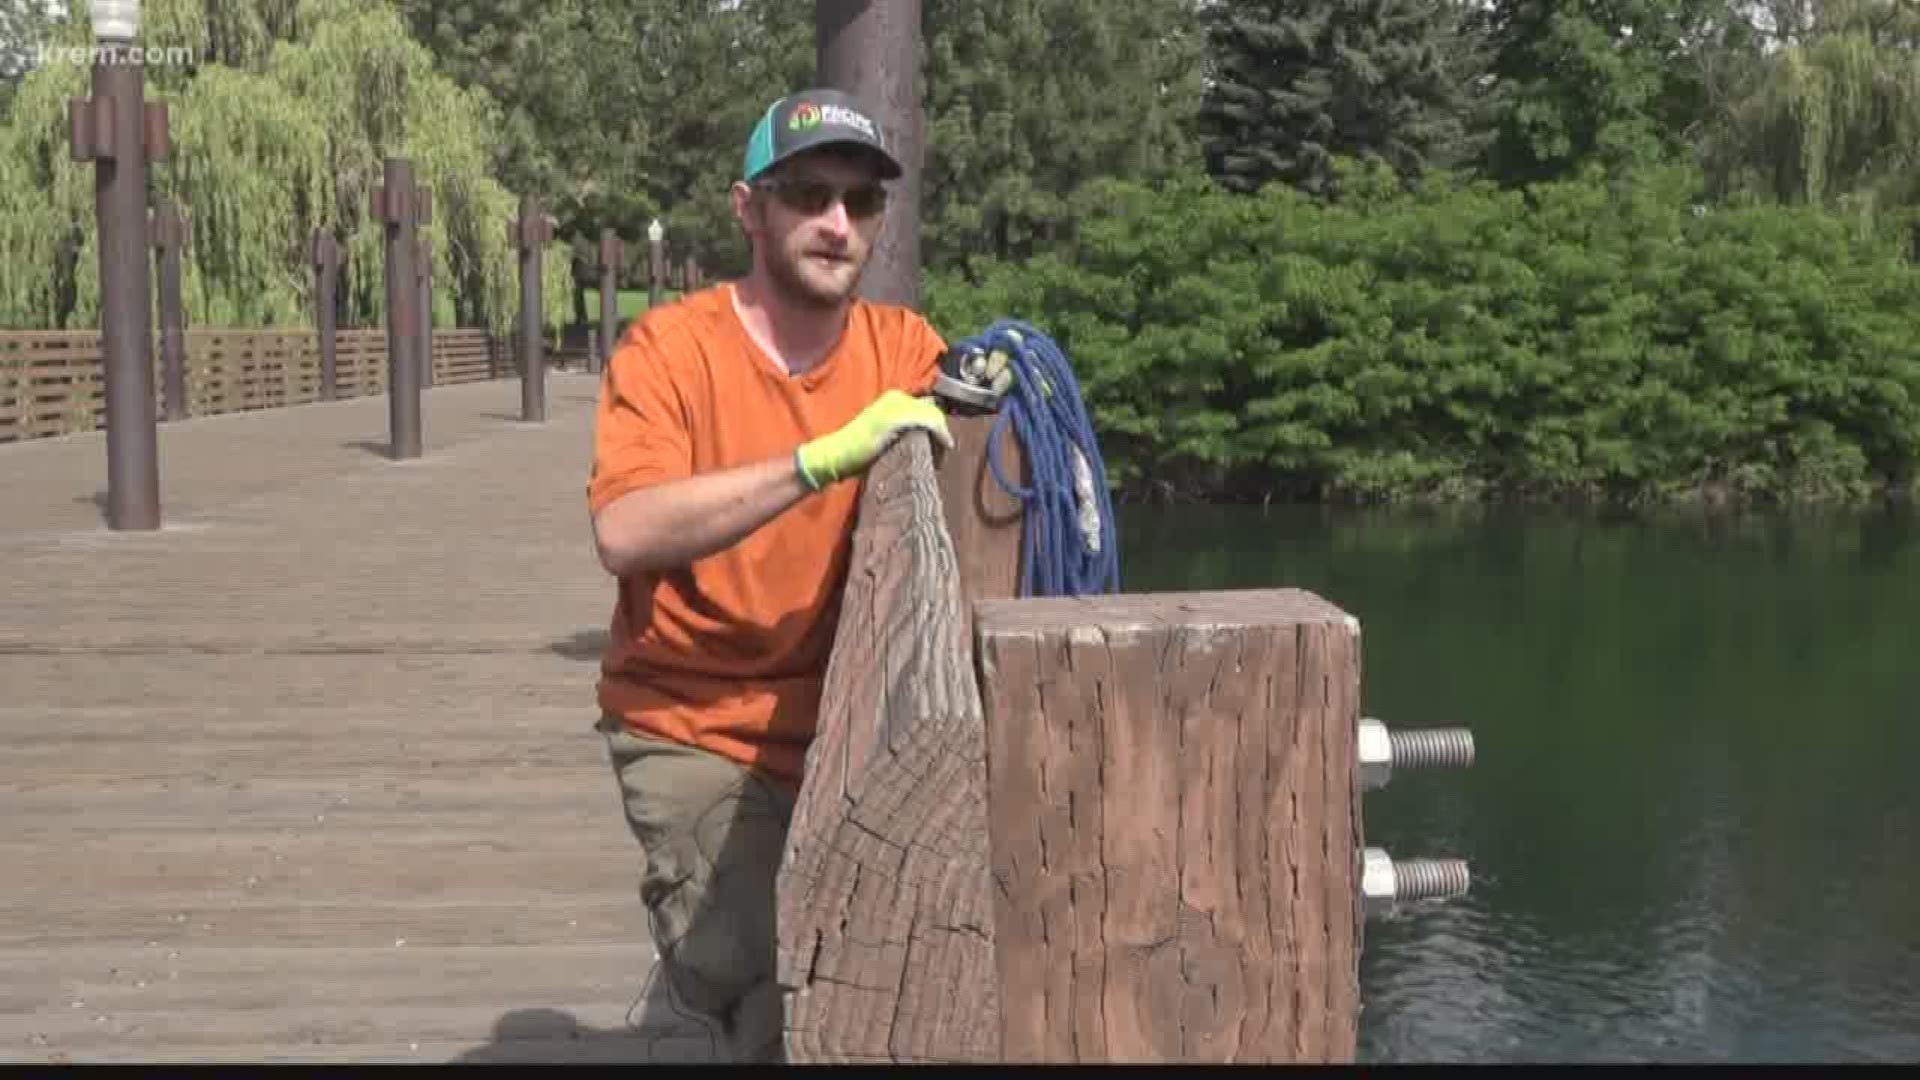 Members of the club are using magnets that can hold thousands of pounds to sweep the Spokane River for old treasures.